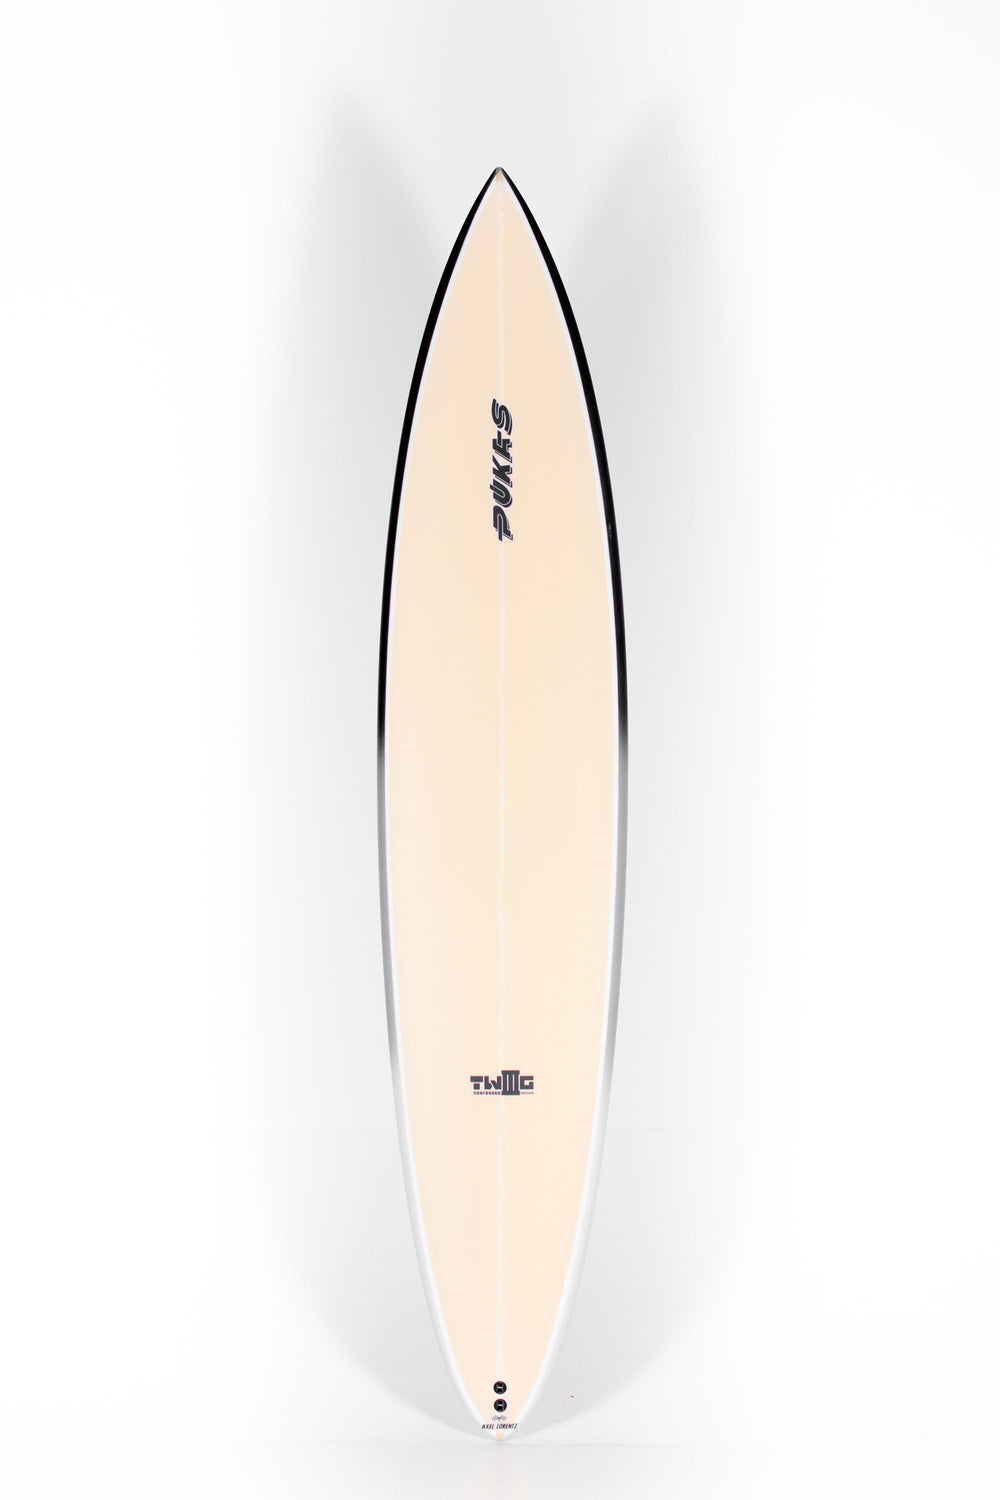 Pukas Surf Shop - Pukas Surfboard - TWIG CHARGER by Axel Lorentz - 8´6” x 20 5/8 x 3 3/8 - 60L  AX06031